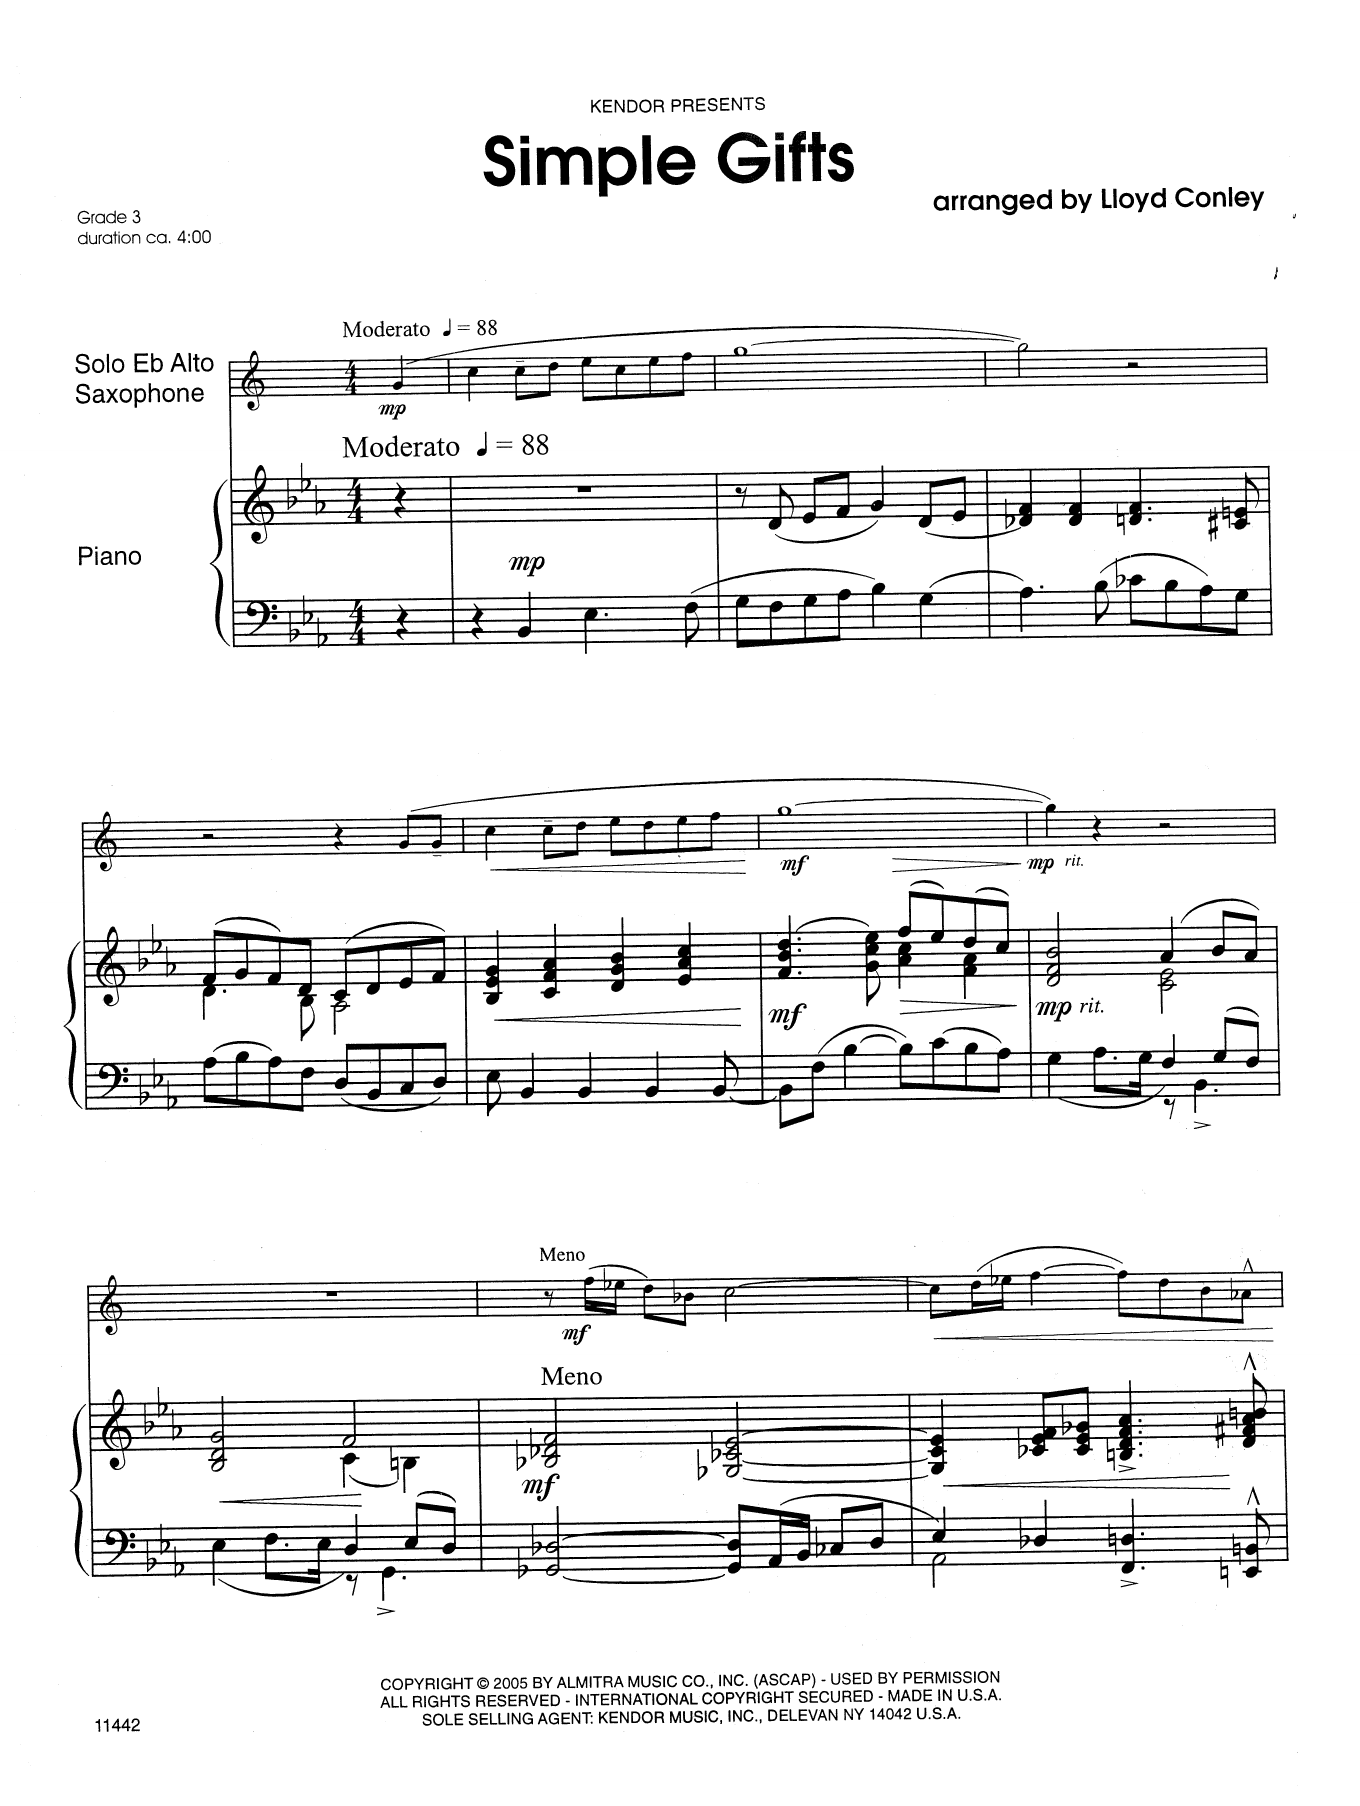 Download Lloyd Conley Simple Gifts - Piano Accompaniment Sheet Music